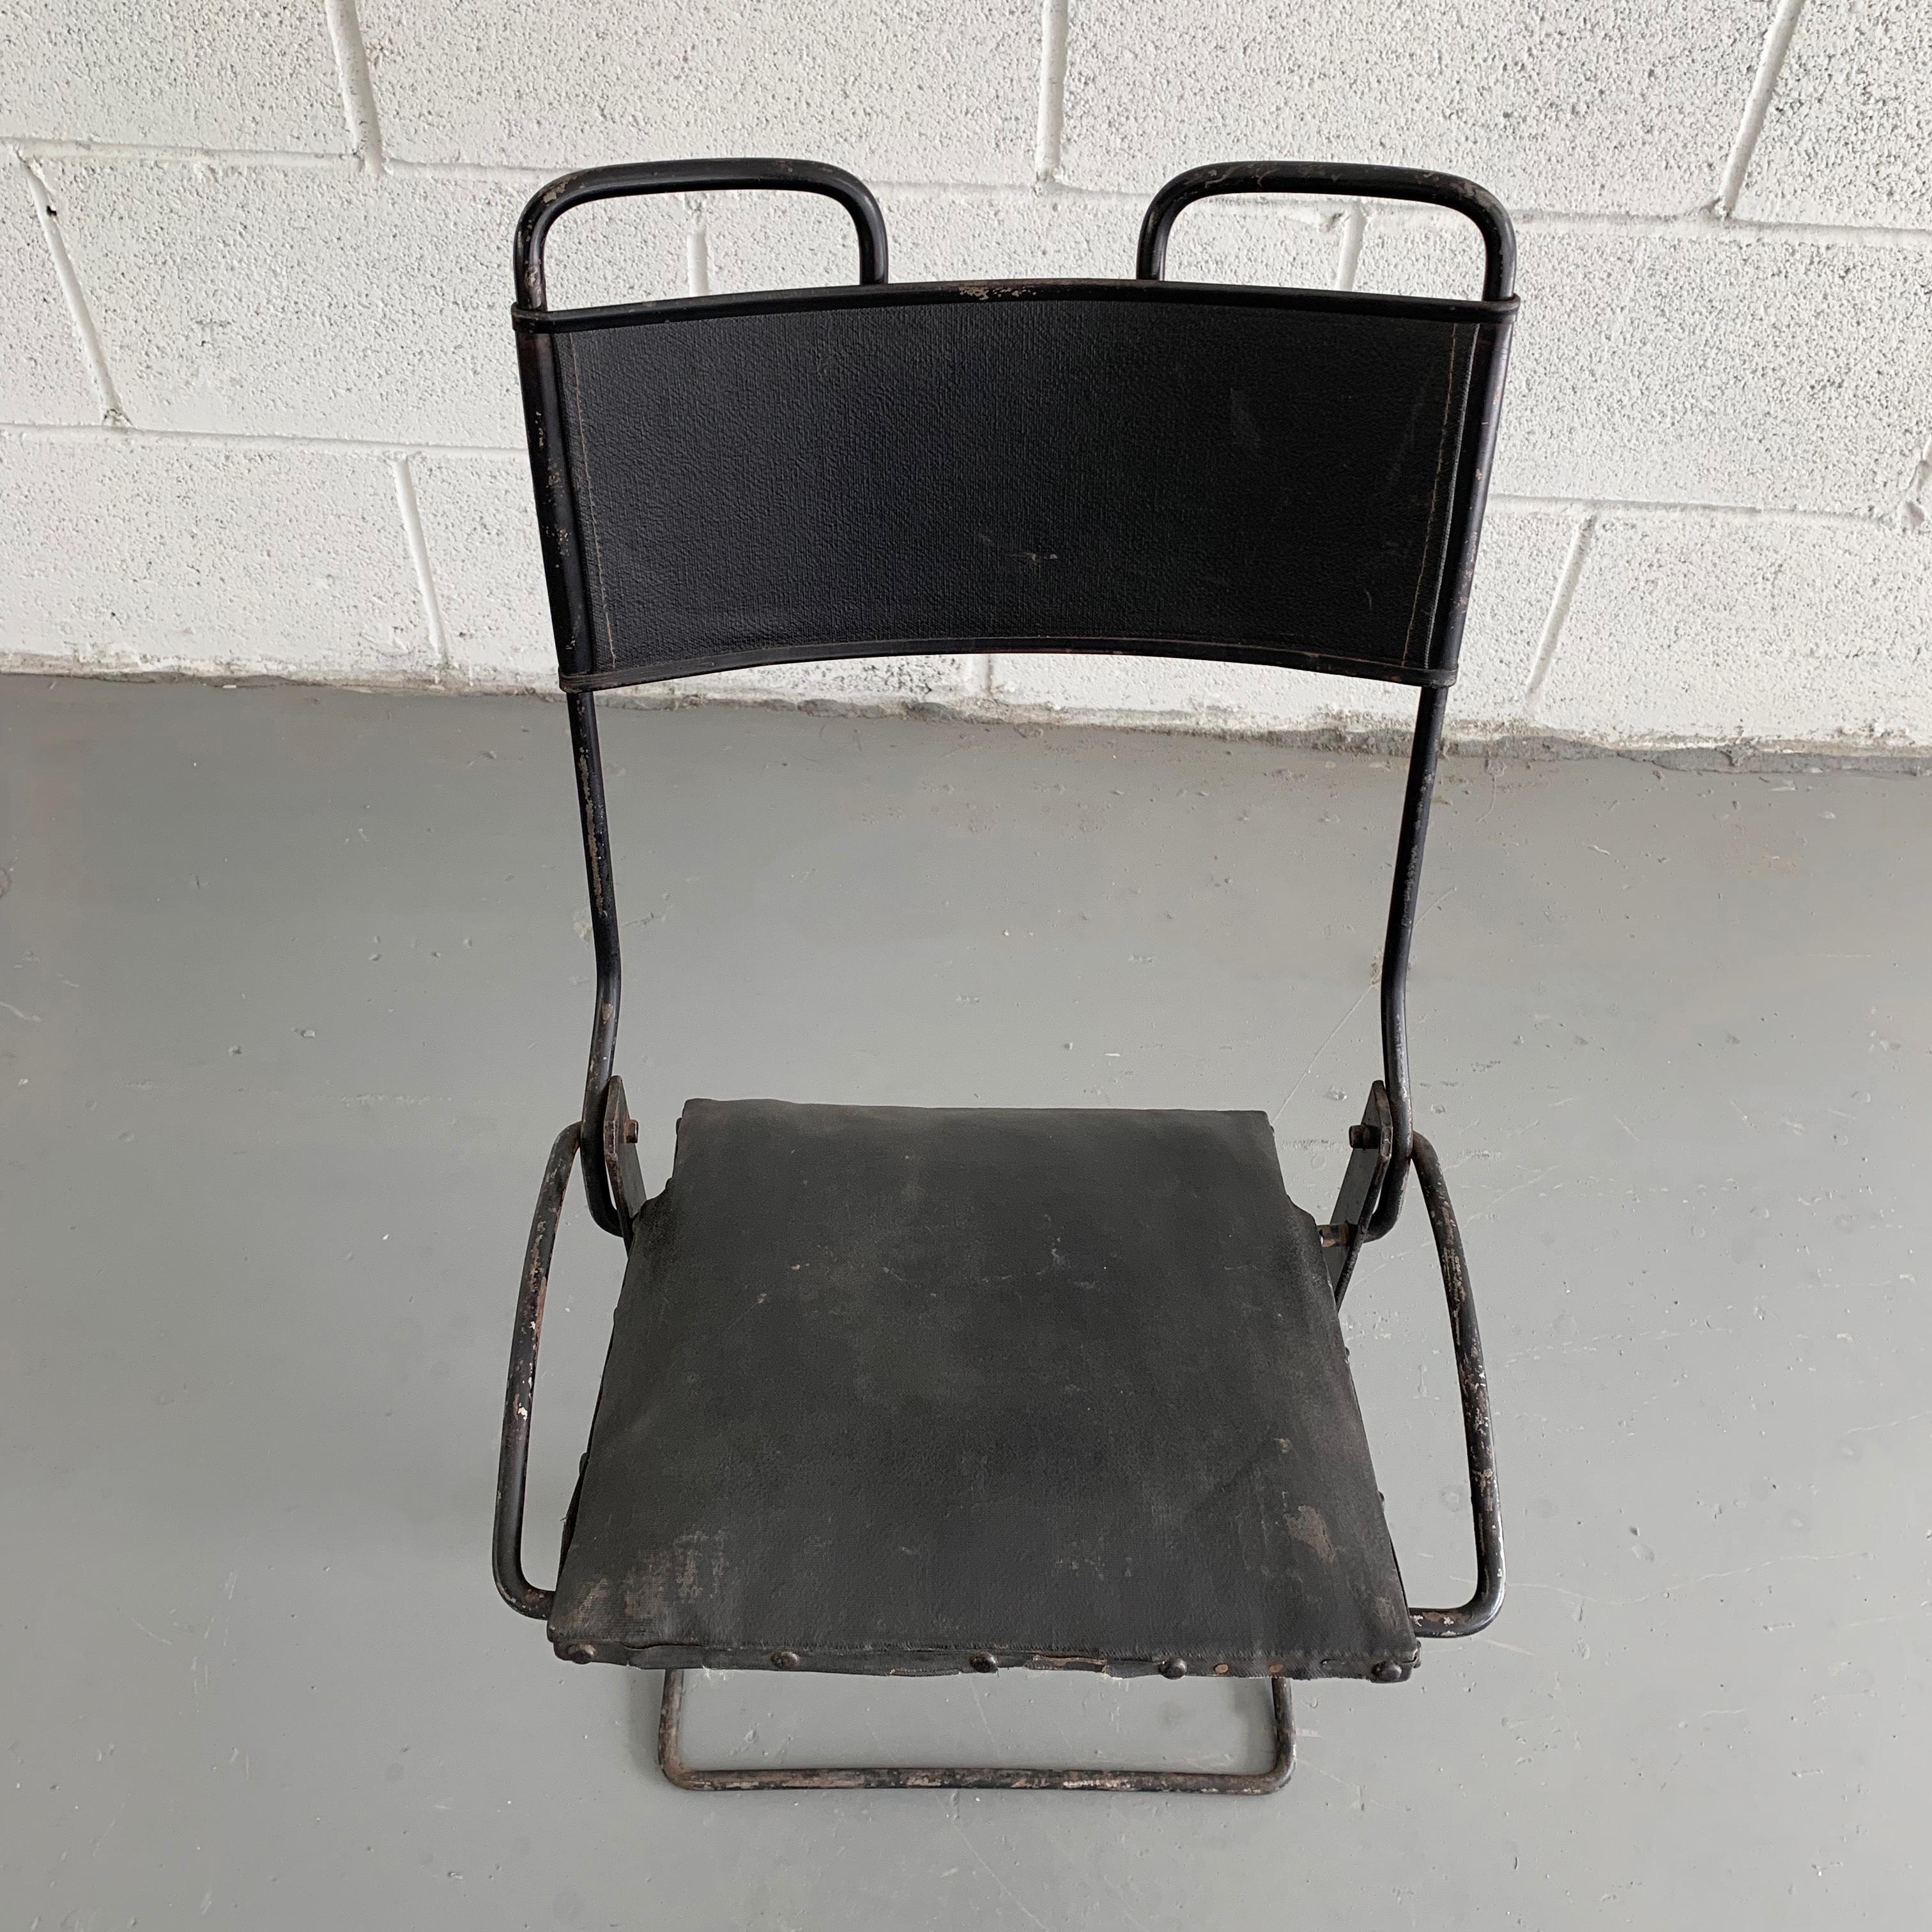 Antique, children's chair for a buggy or early automobile features a cast iron frame with folding vinyl seat and back. All original patina.